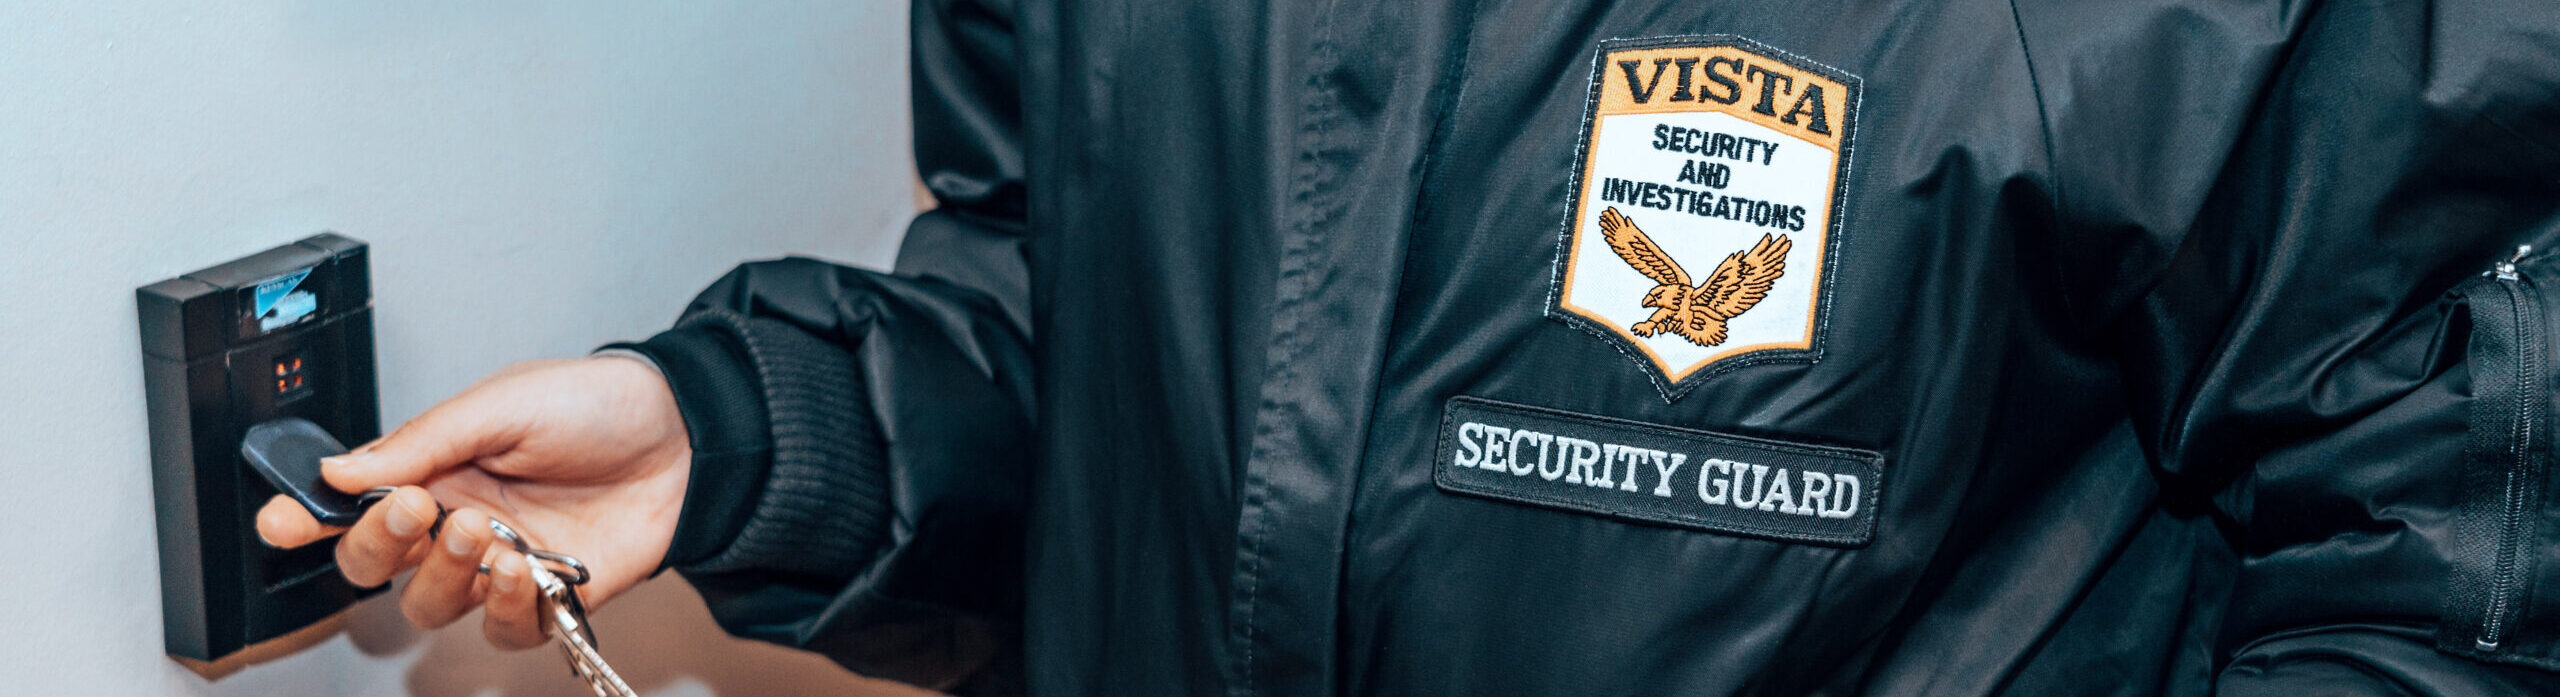 Commercial Security Services & Systems Montreal